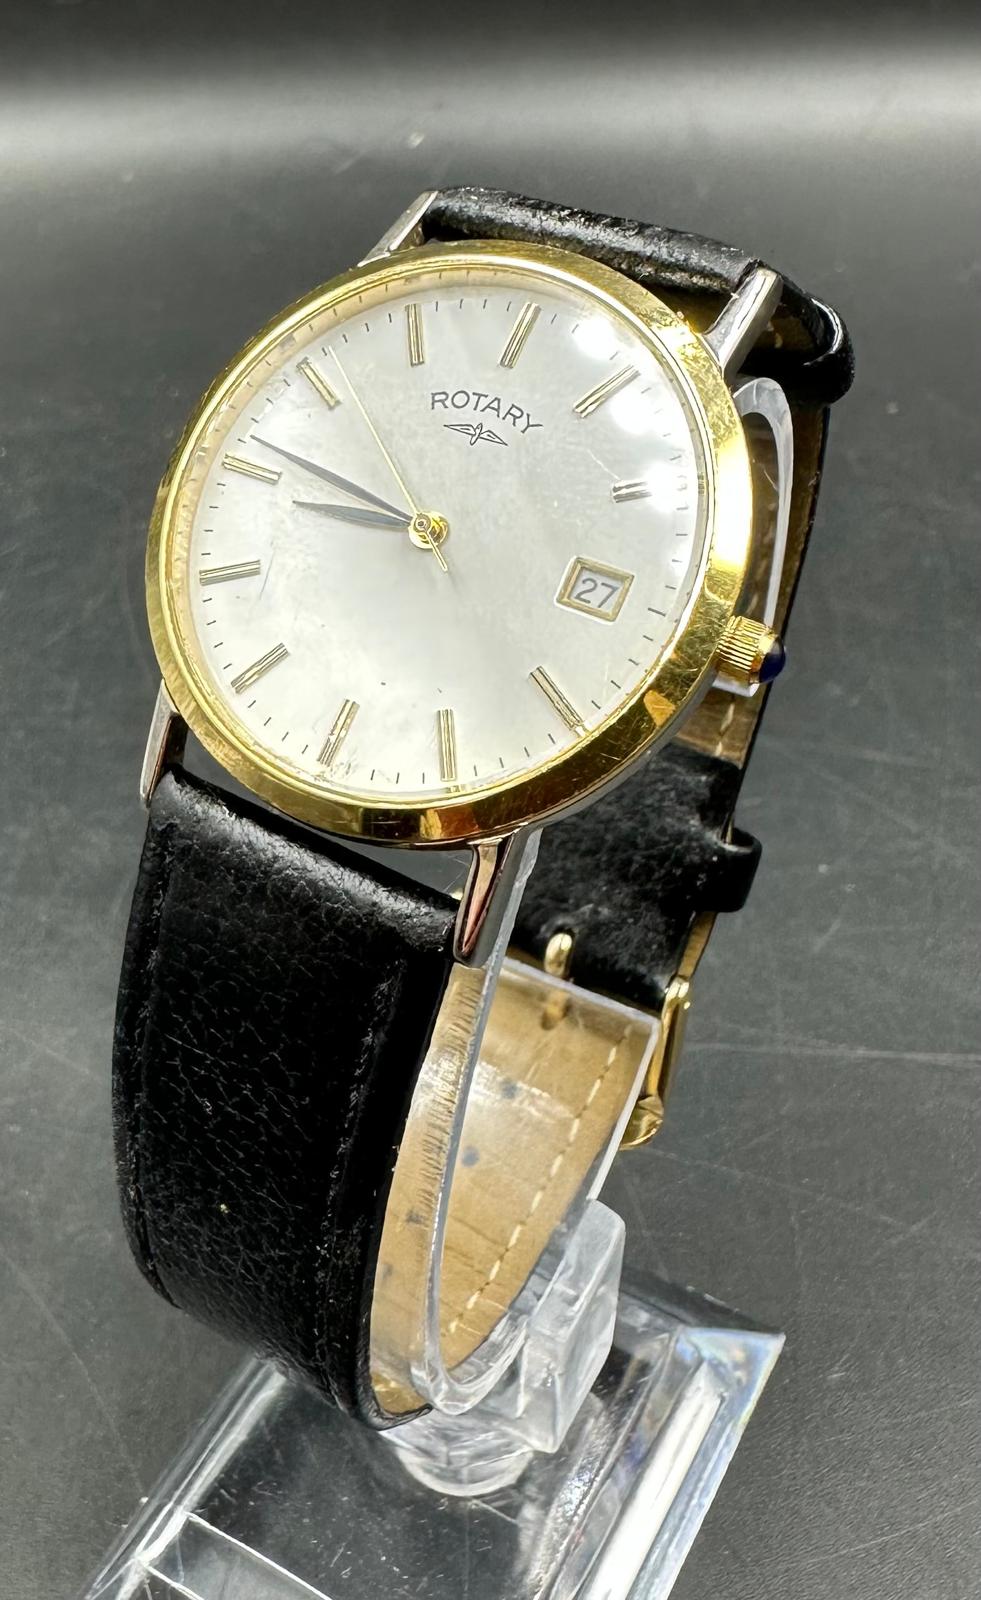 A Rotary wristwatch on leather strap, gold plated, model reference number 4990 UCAR 364 - Image 2 of 6